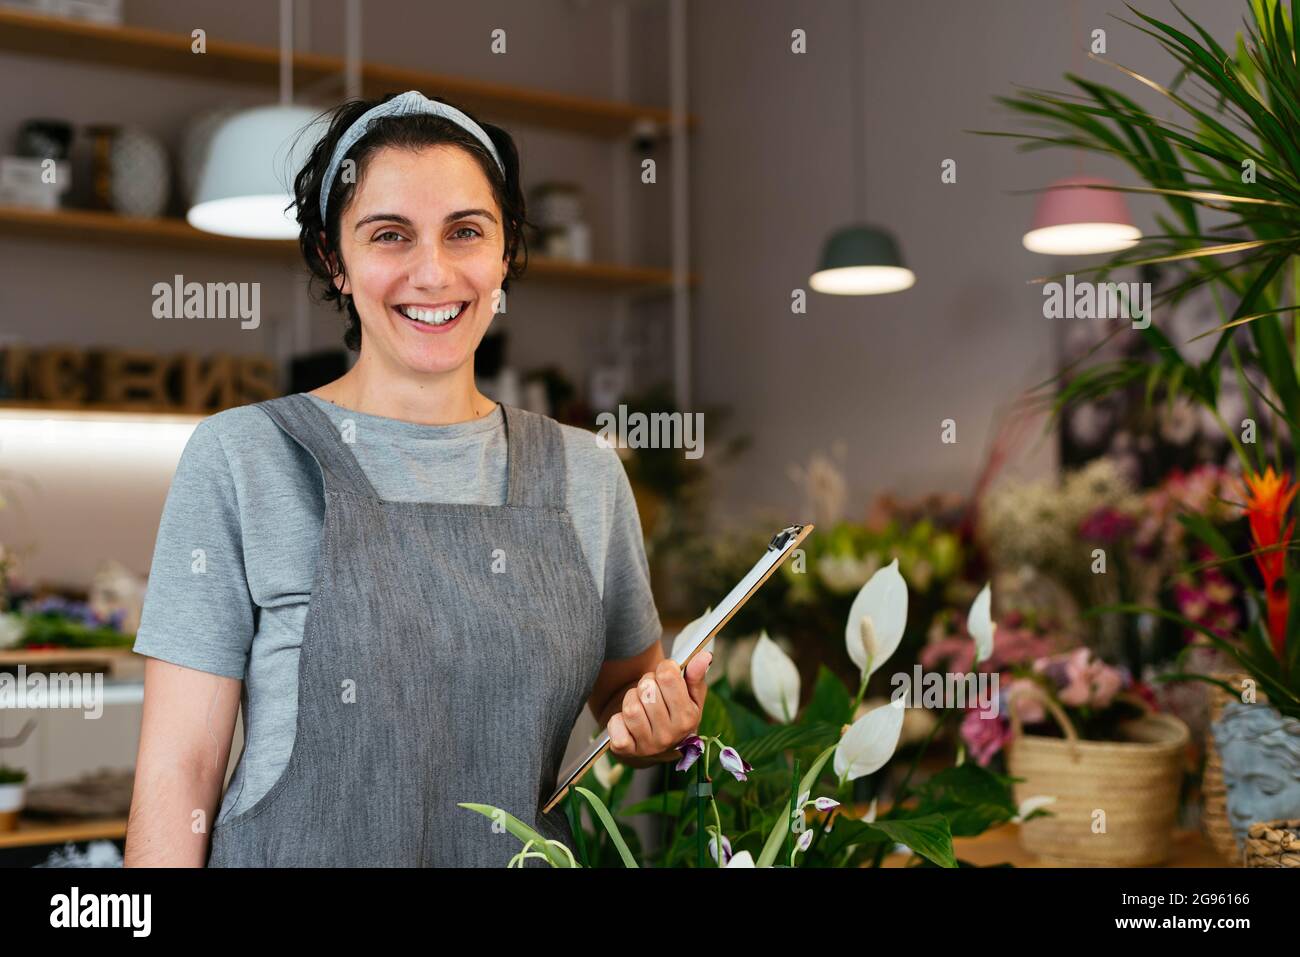 Portrait of a young female florist working in her shop Stock Photo